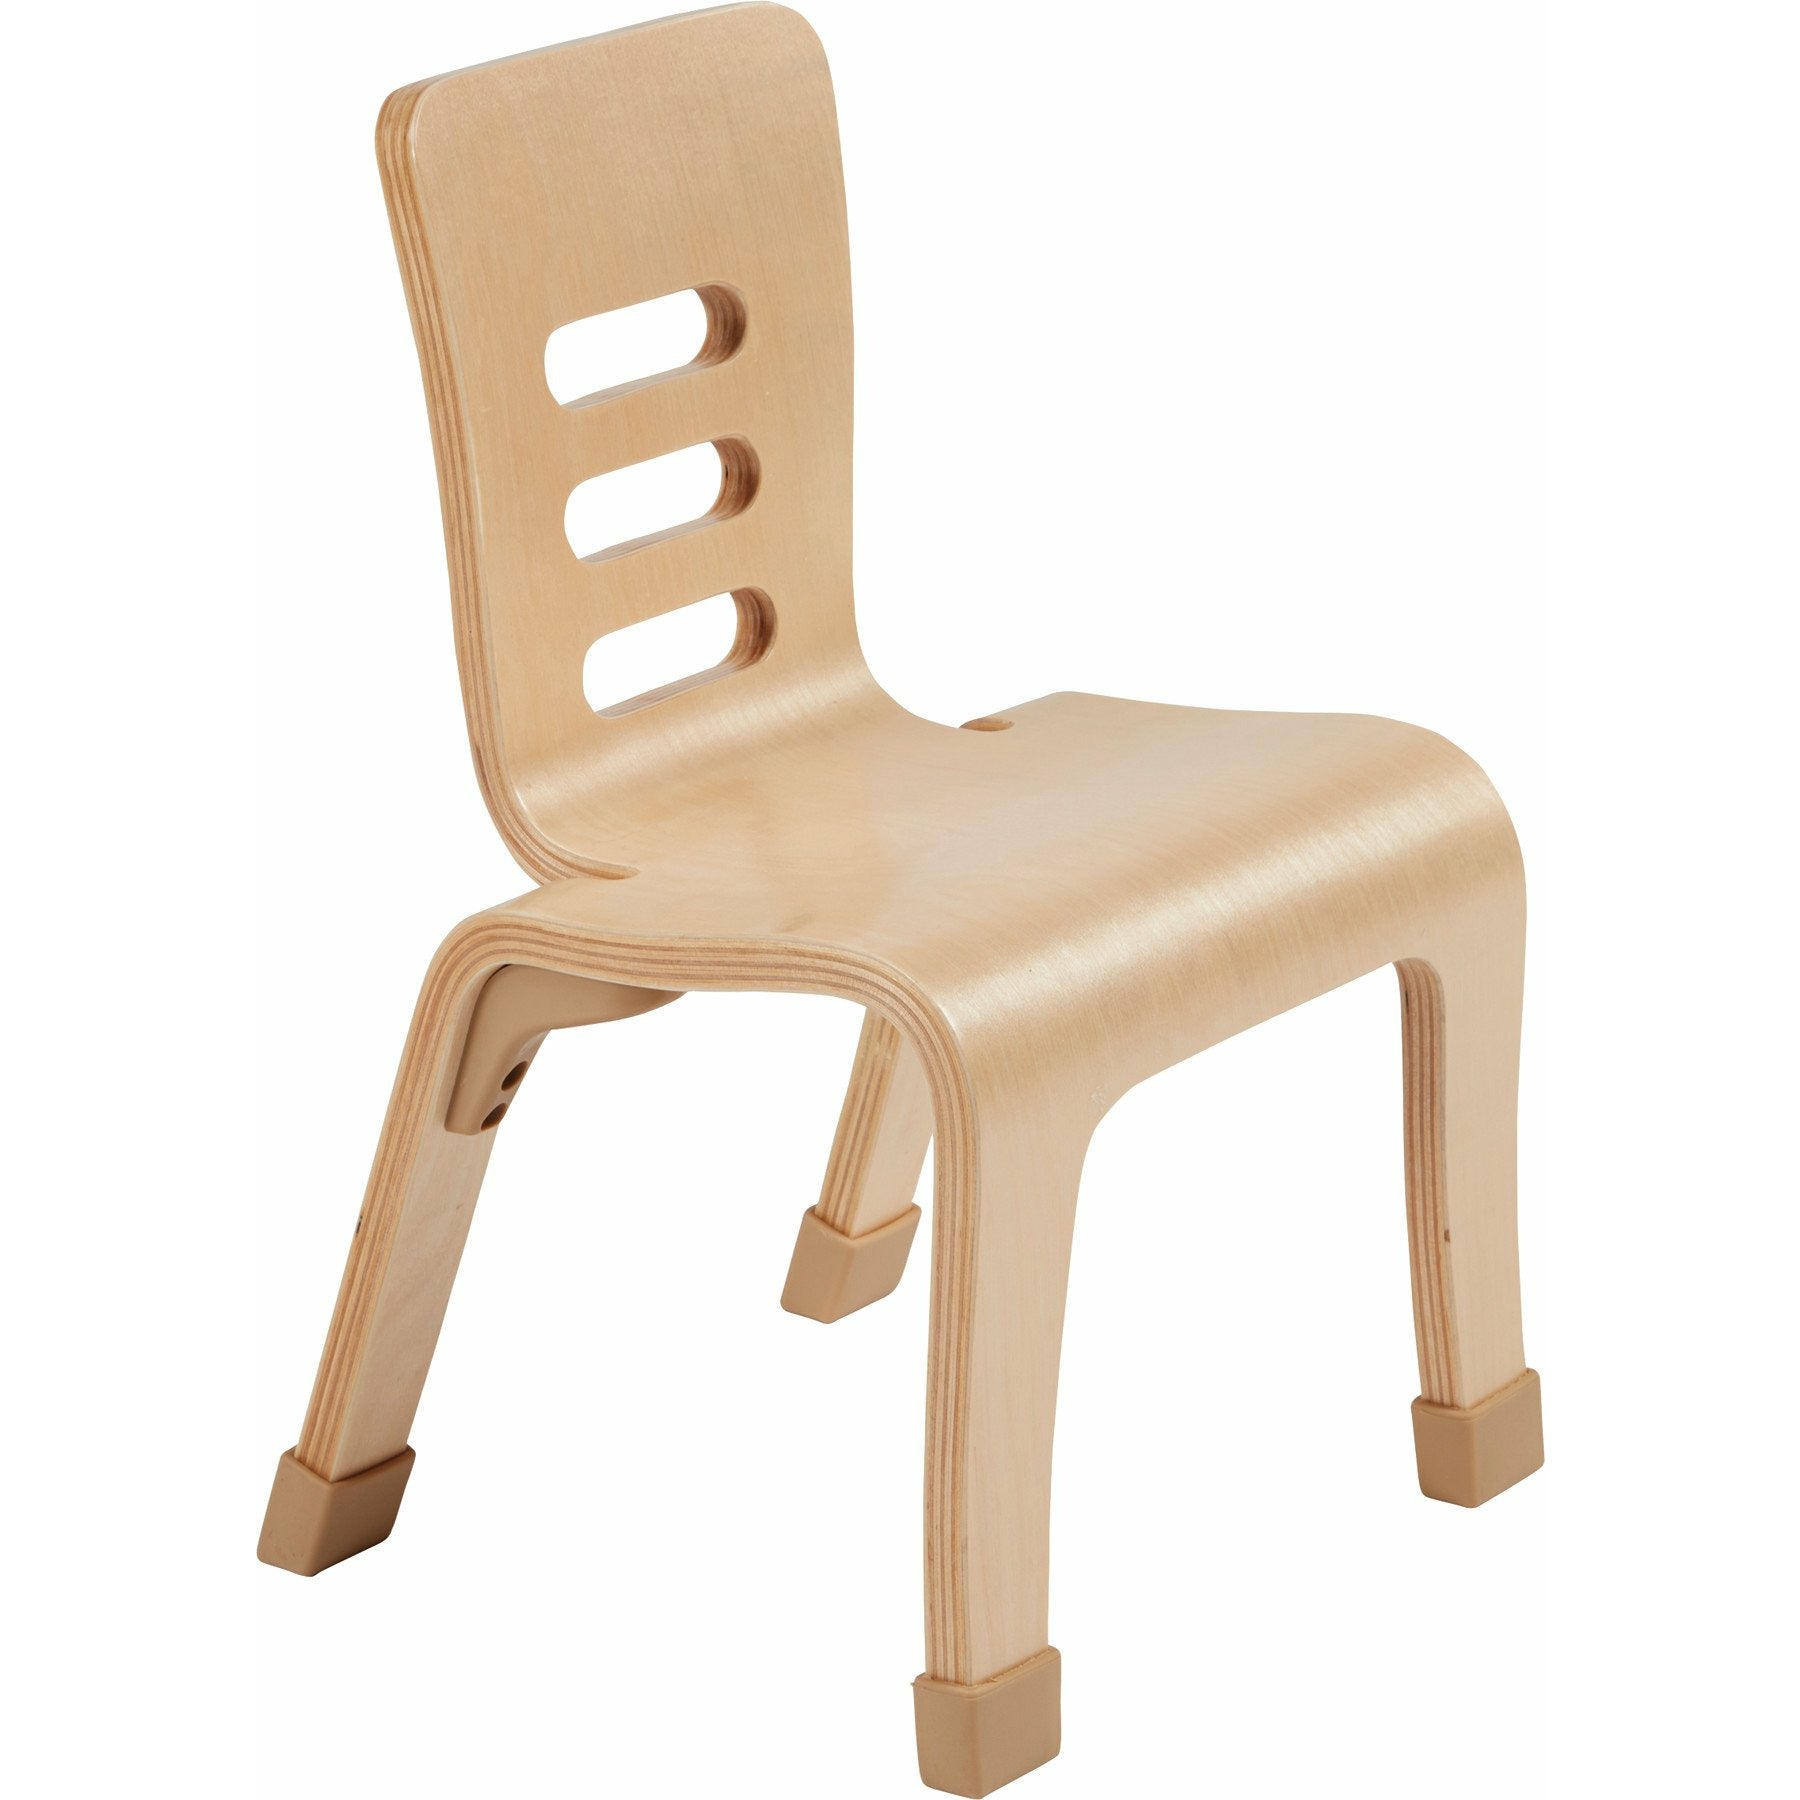 Enhanced Bentwood Chairs, 10", Carton of 2